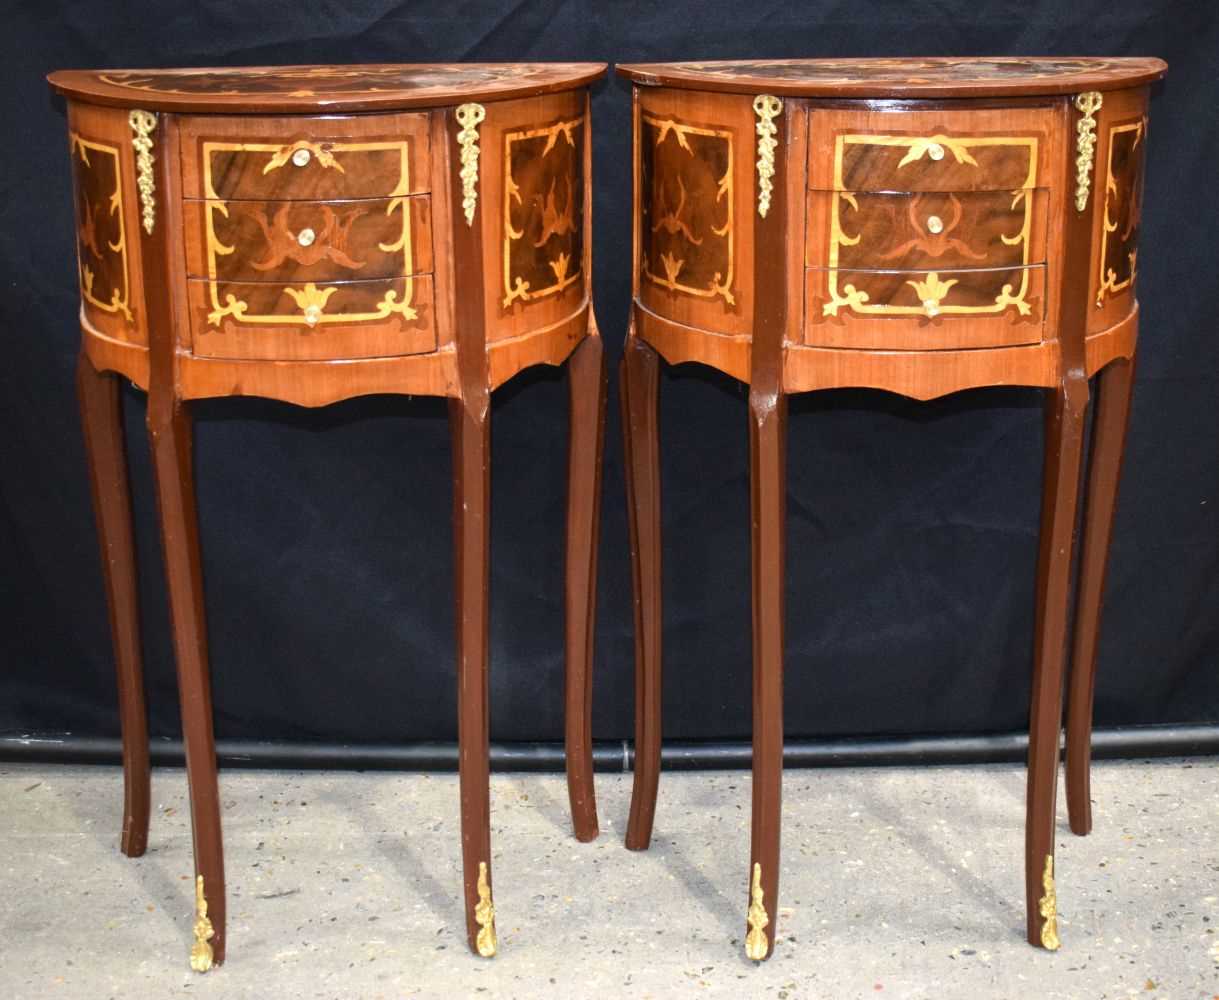 A pair of Baroque style inlaid half moon side 3 drawer tables 71 x 45 x 25cm (2) - Image 2 of 10